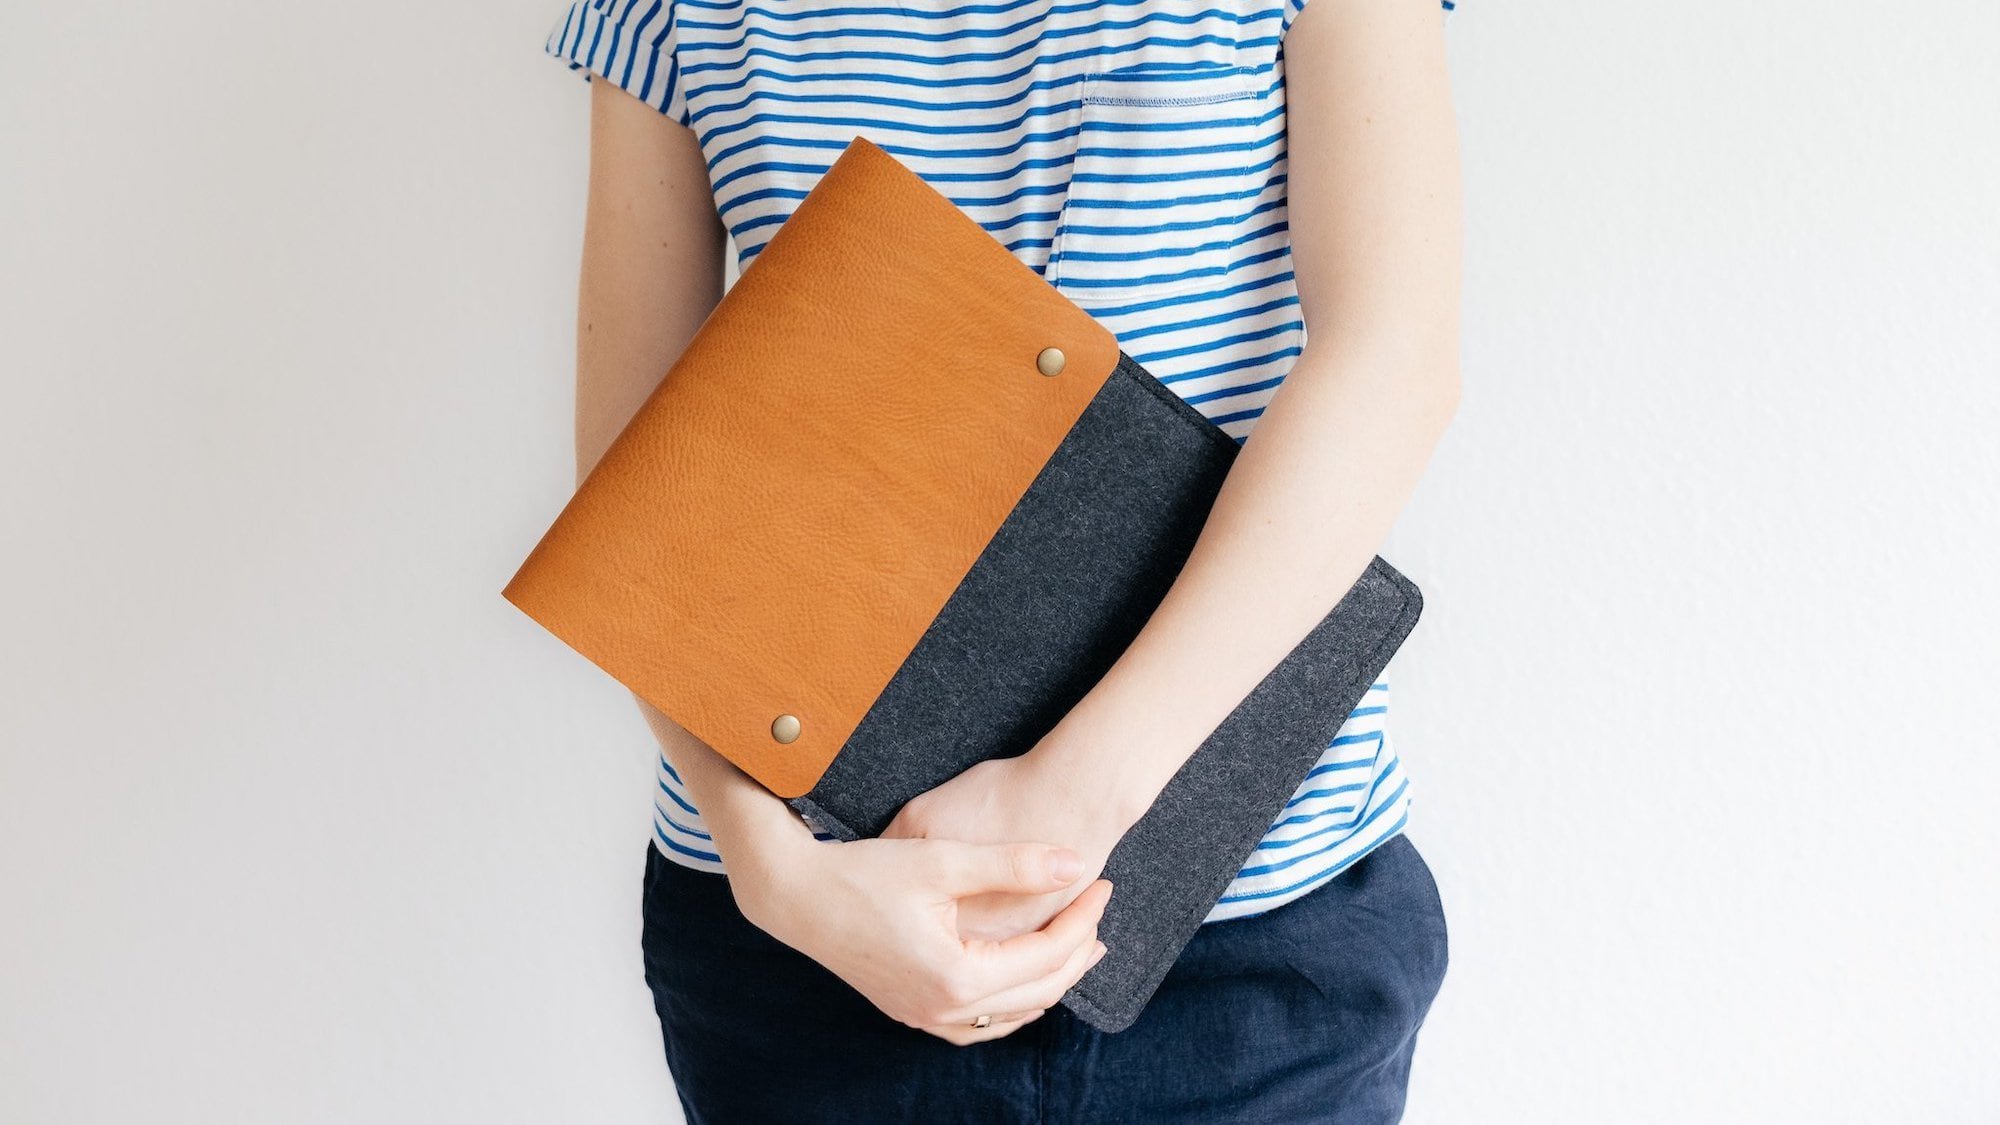 band&roll Courier nostalgic iPad case blends felt and leather for a timeless design